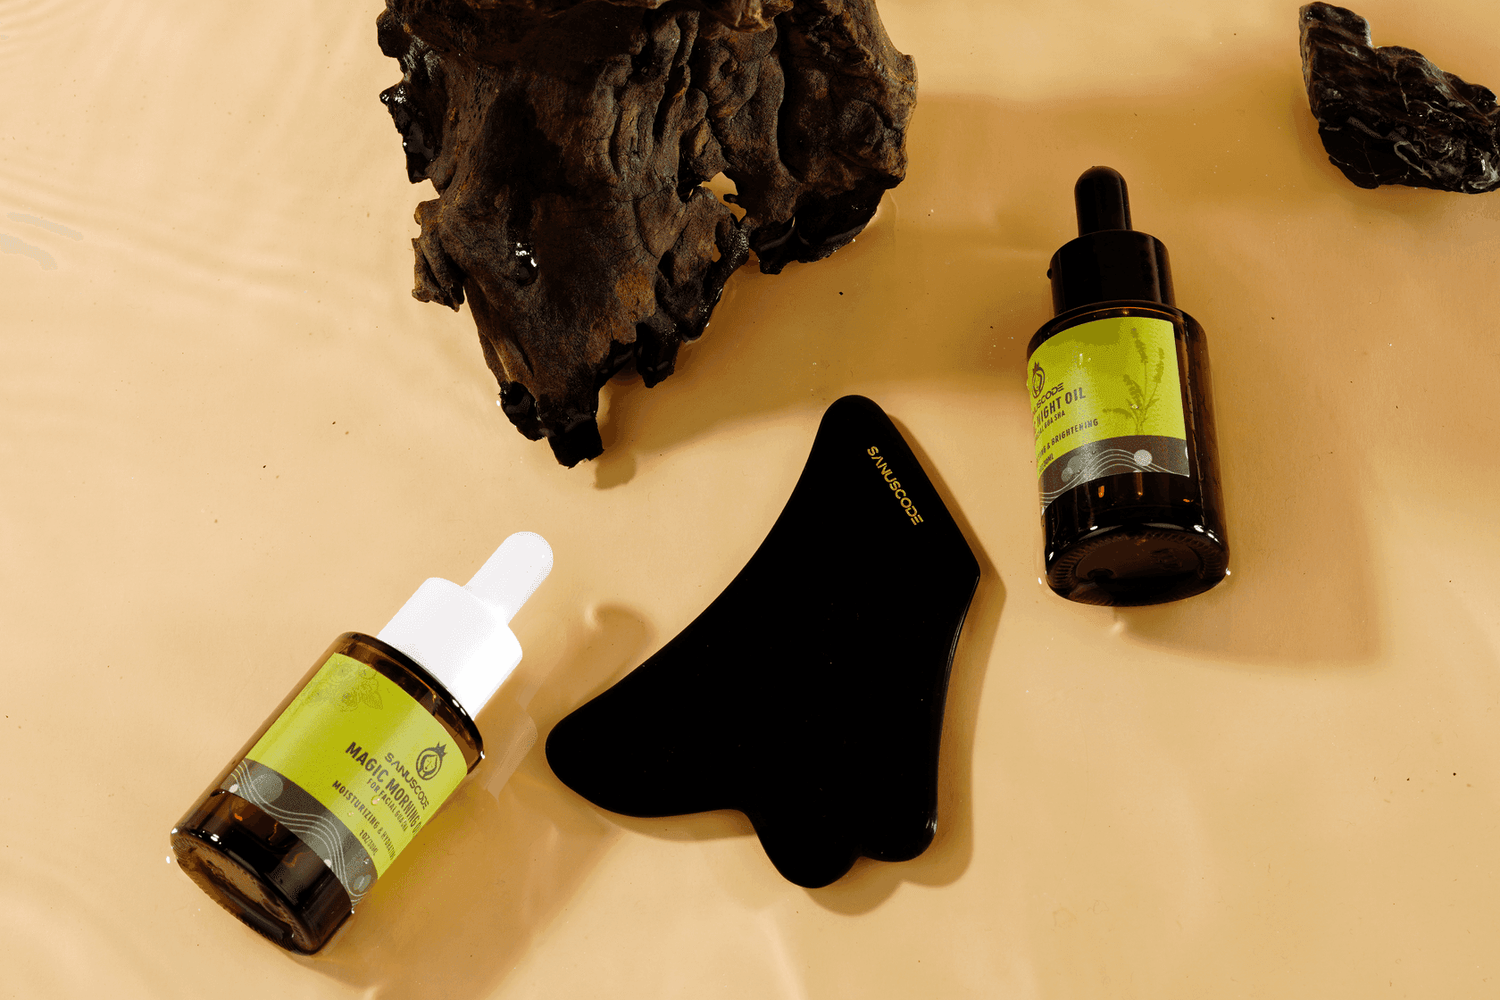 black obsidian gua sha stone and facial gua sha oil kit lay in water, sandalwood stand by, beige background